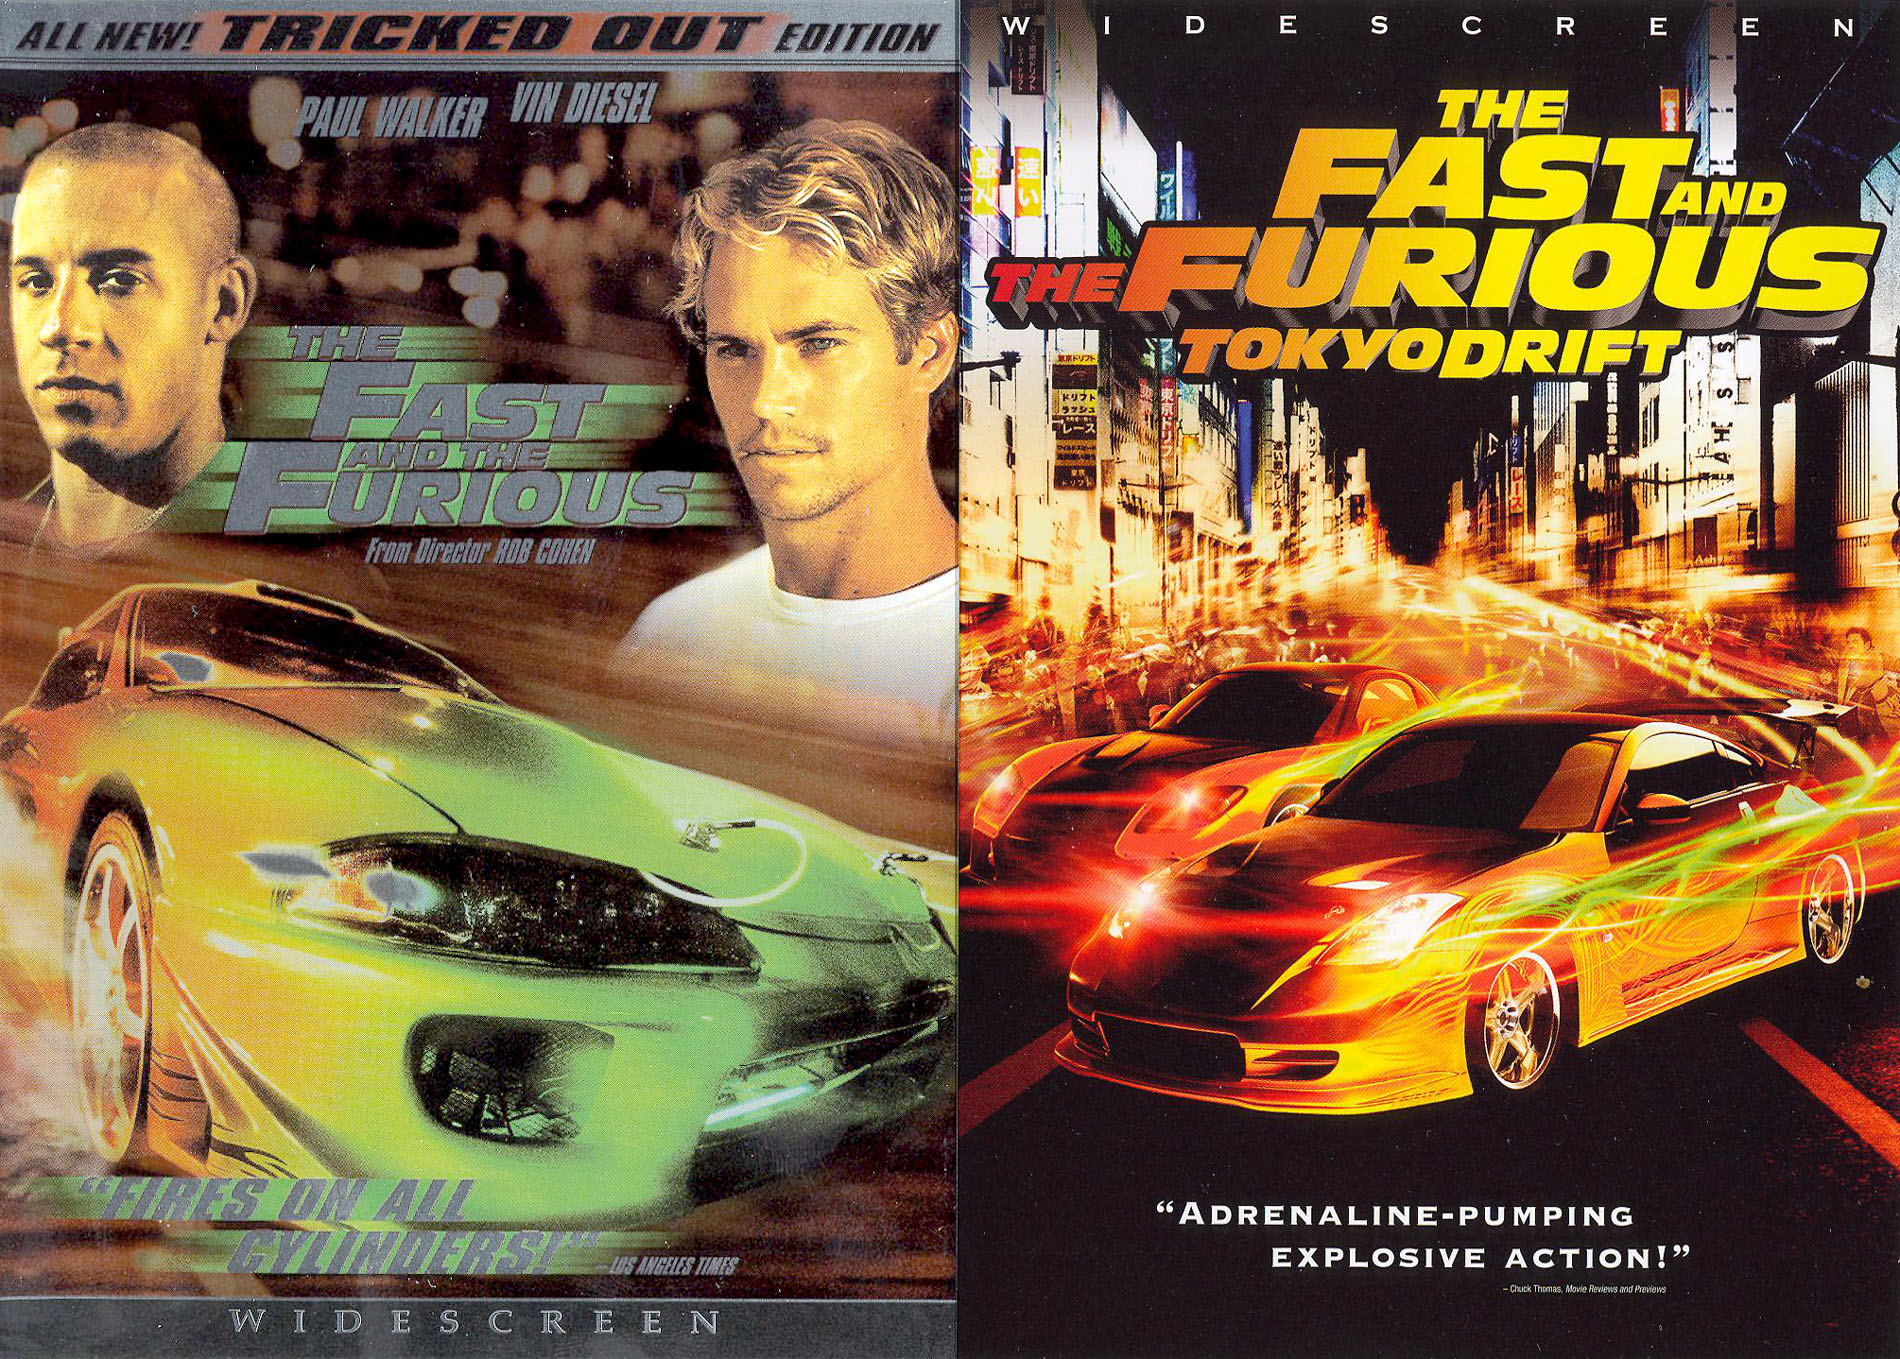 The Fast and the Furious: Tokyo Drift (DVD)